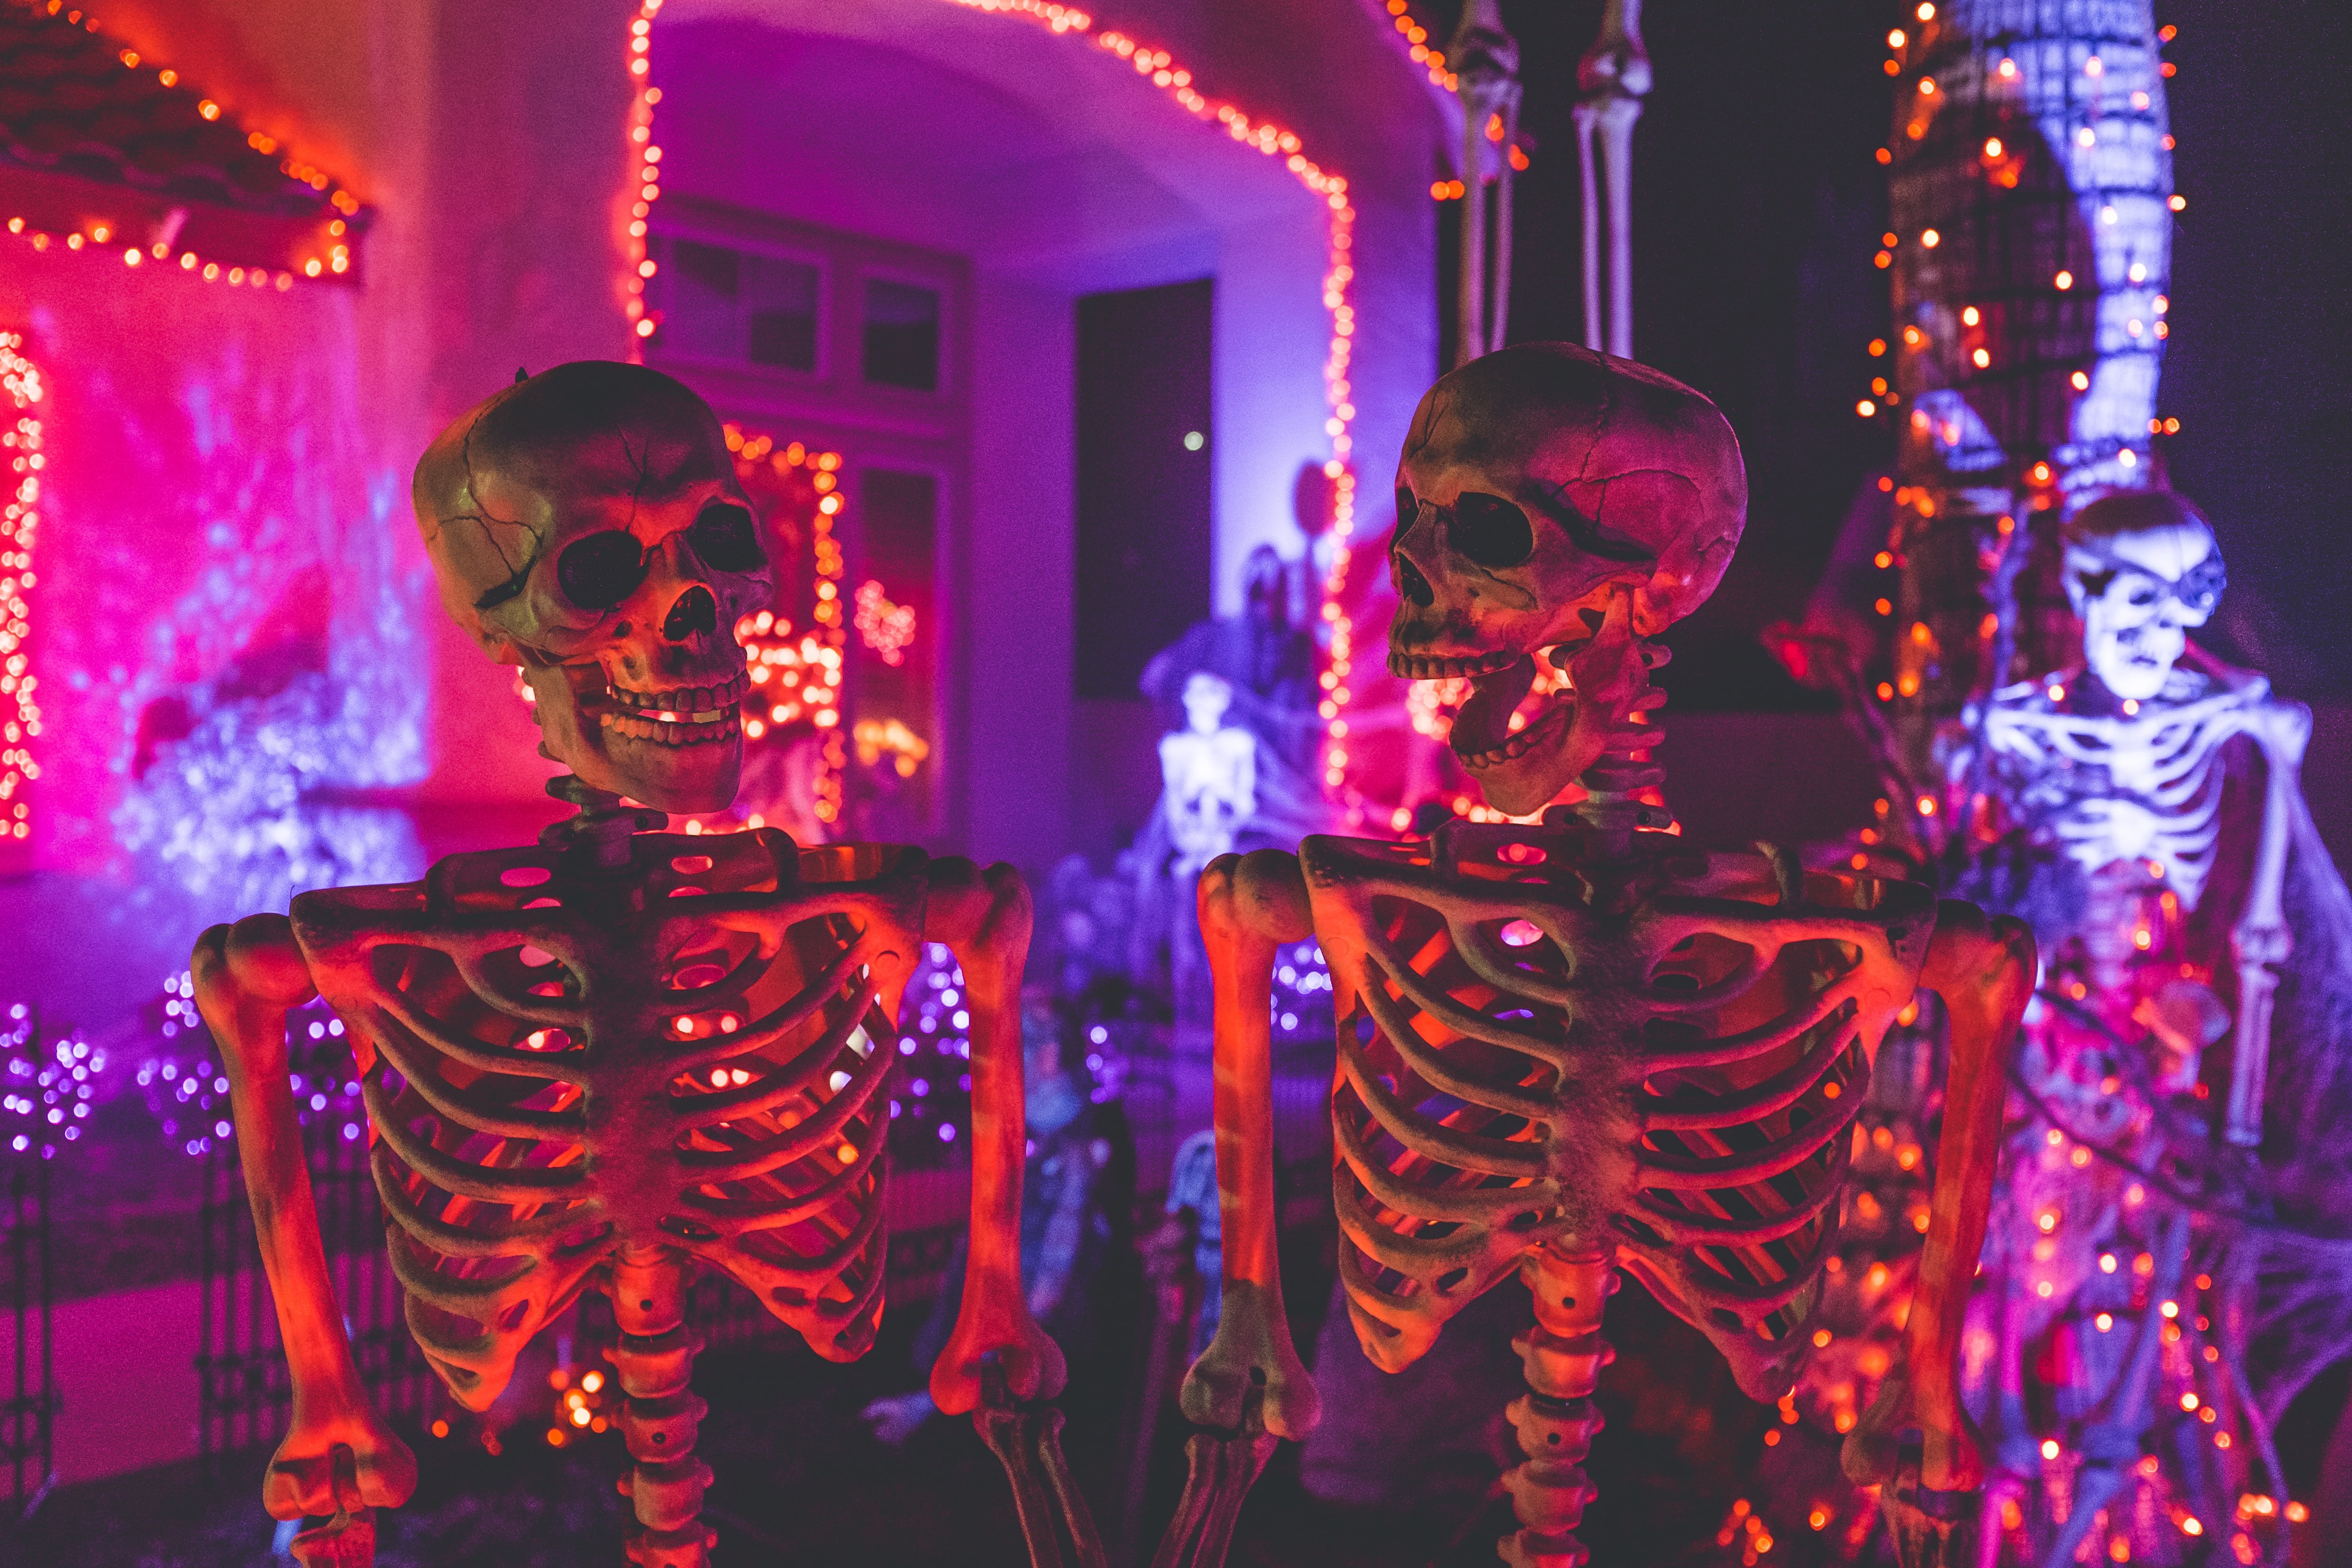 Skeletons as decorations